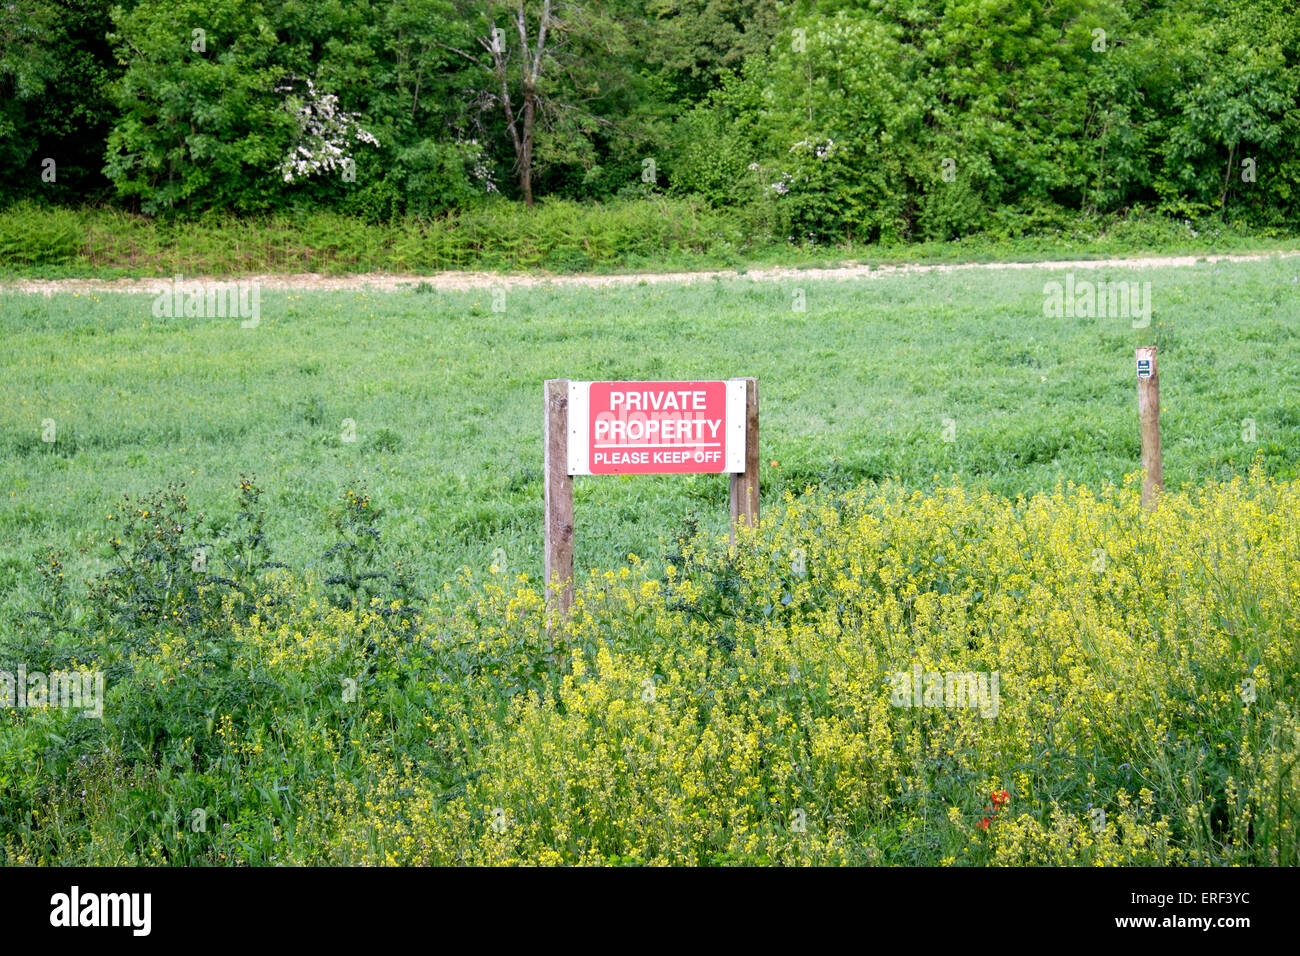 Red private property notice with white text standing on agricultural land in UK Stock Photo